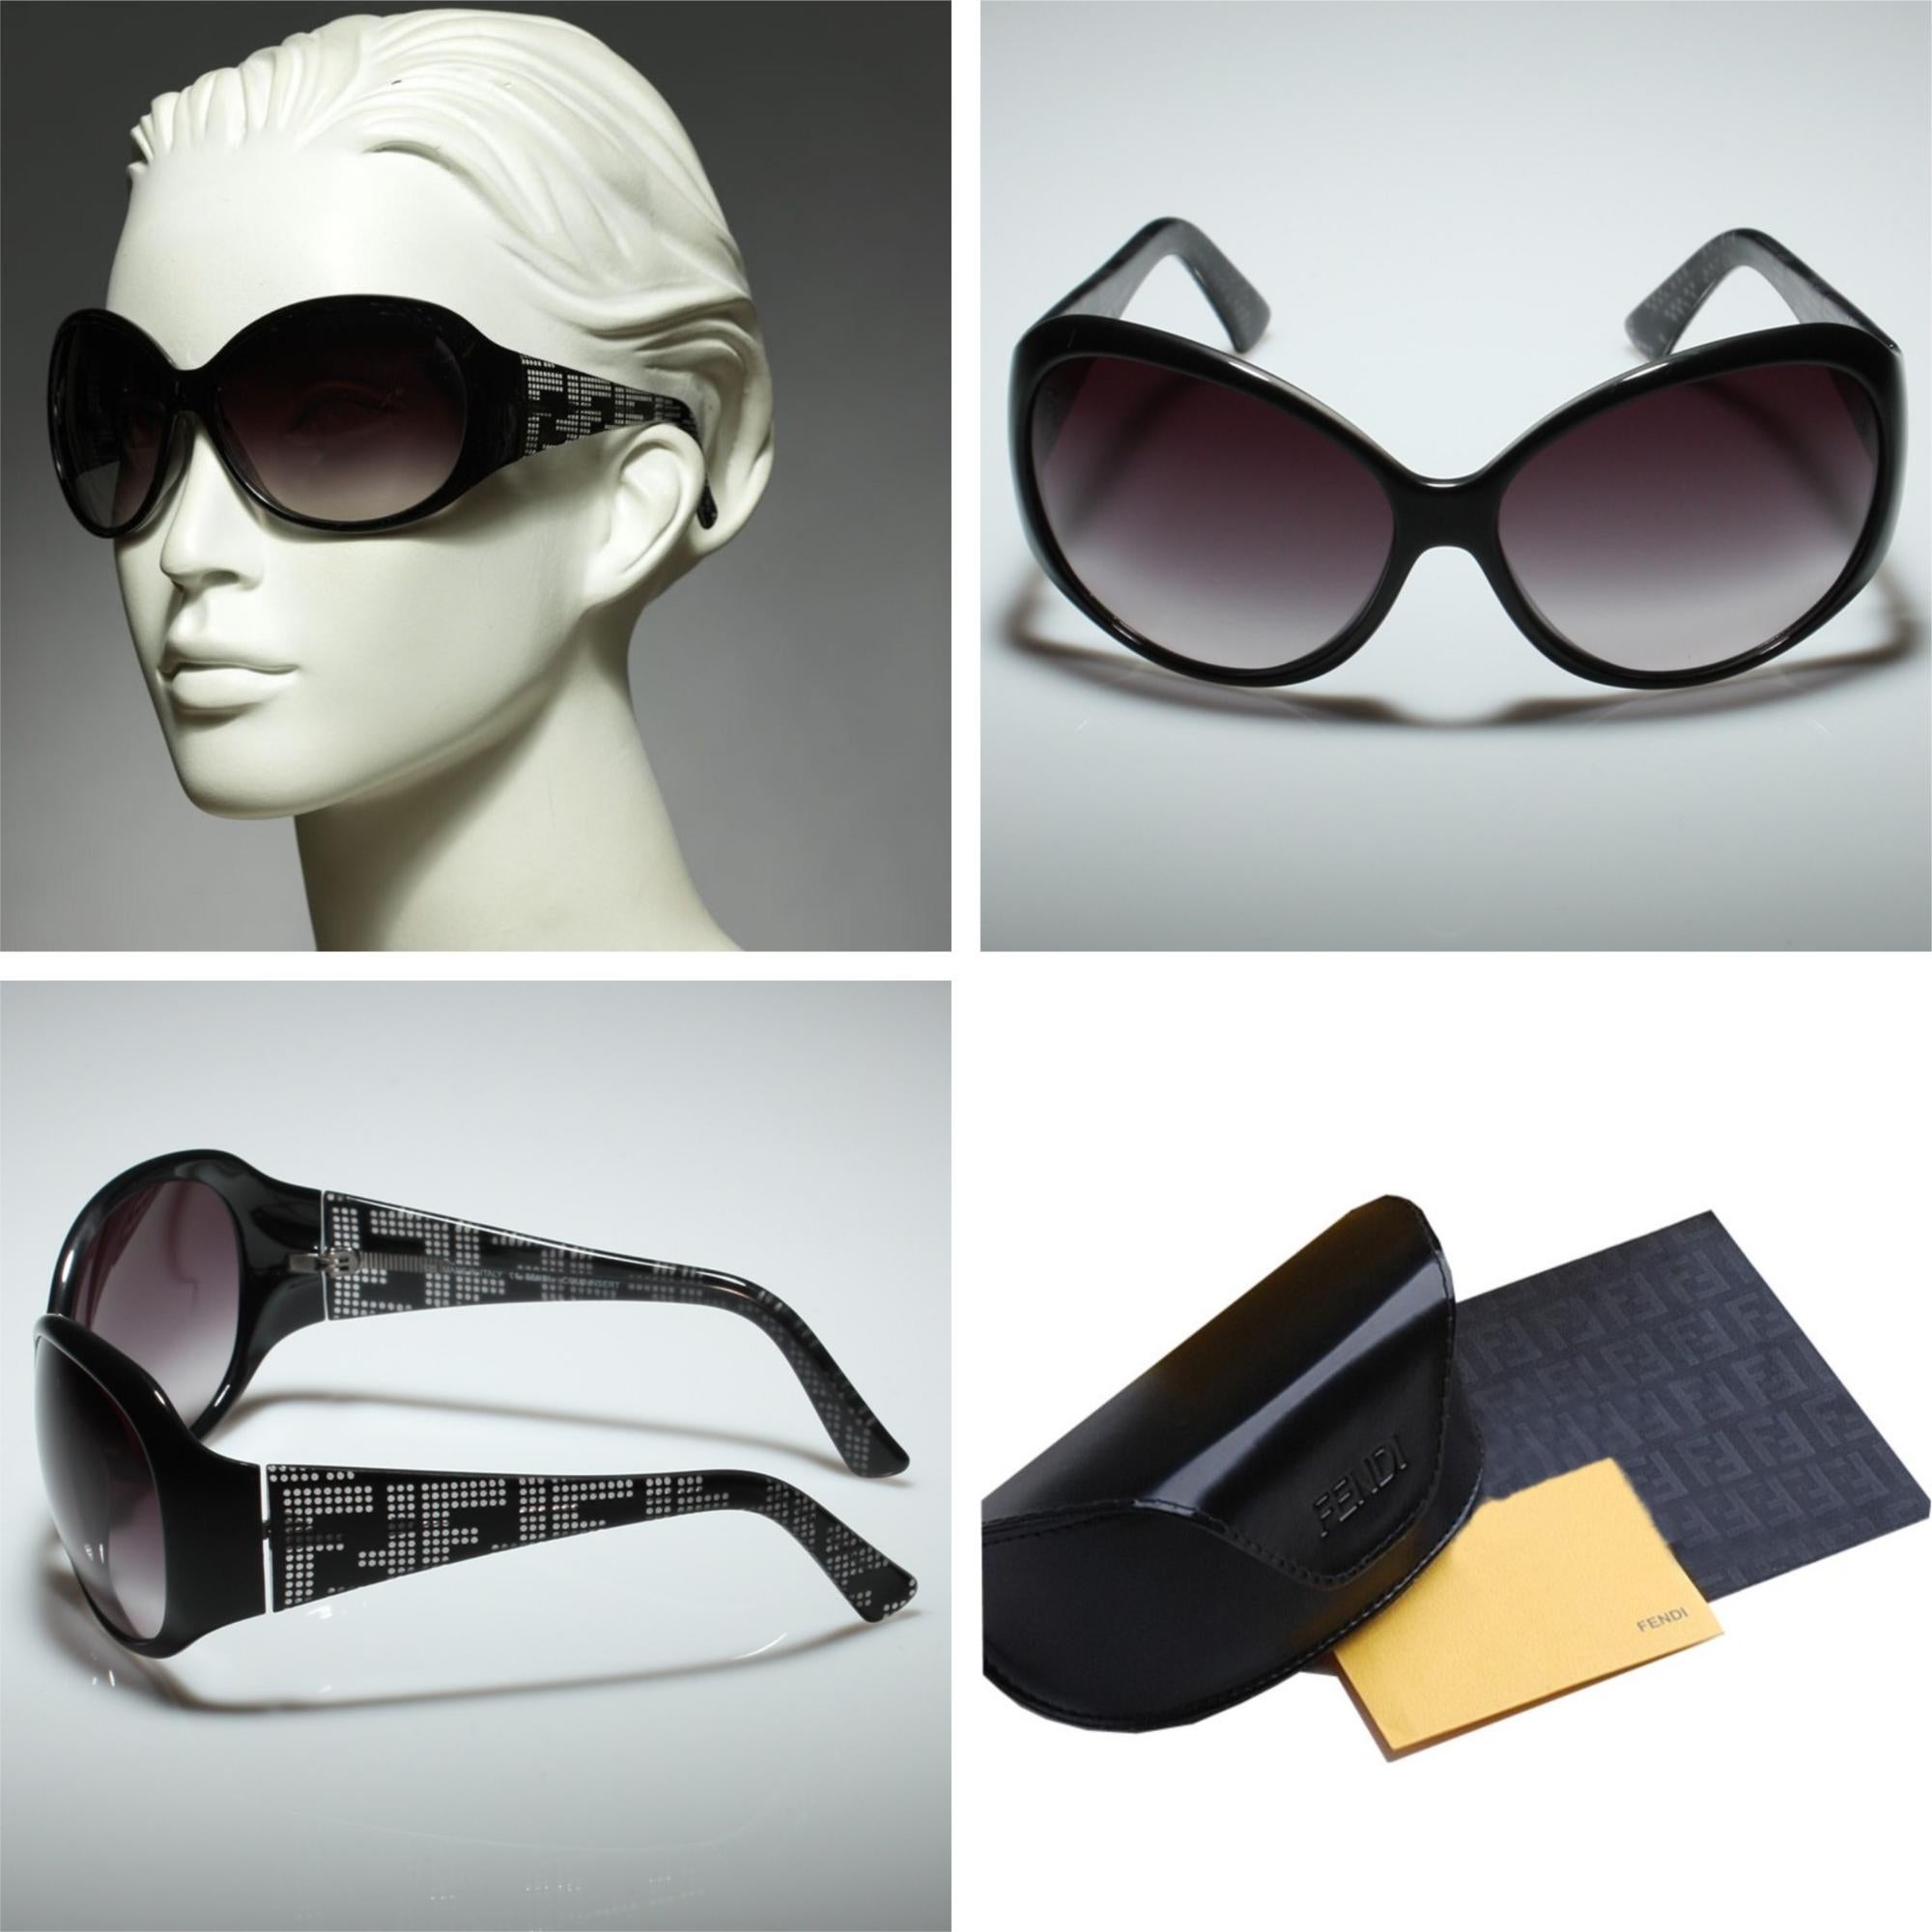  New Fendi Black Sunglasses with Case
Brand New
Fendi FF Logo at Sides
Beautiful Black Frames
66-14-125
Lightweight Scratch and Impact Resistant
Made in Italy
100% UVA/UVB Protection
Comes with Case & Cleaning Clothing